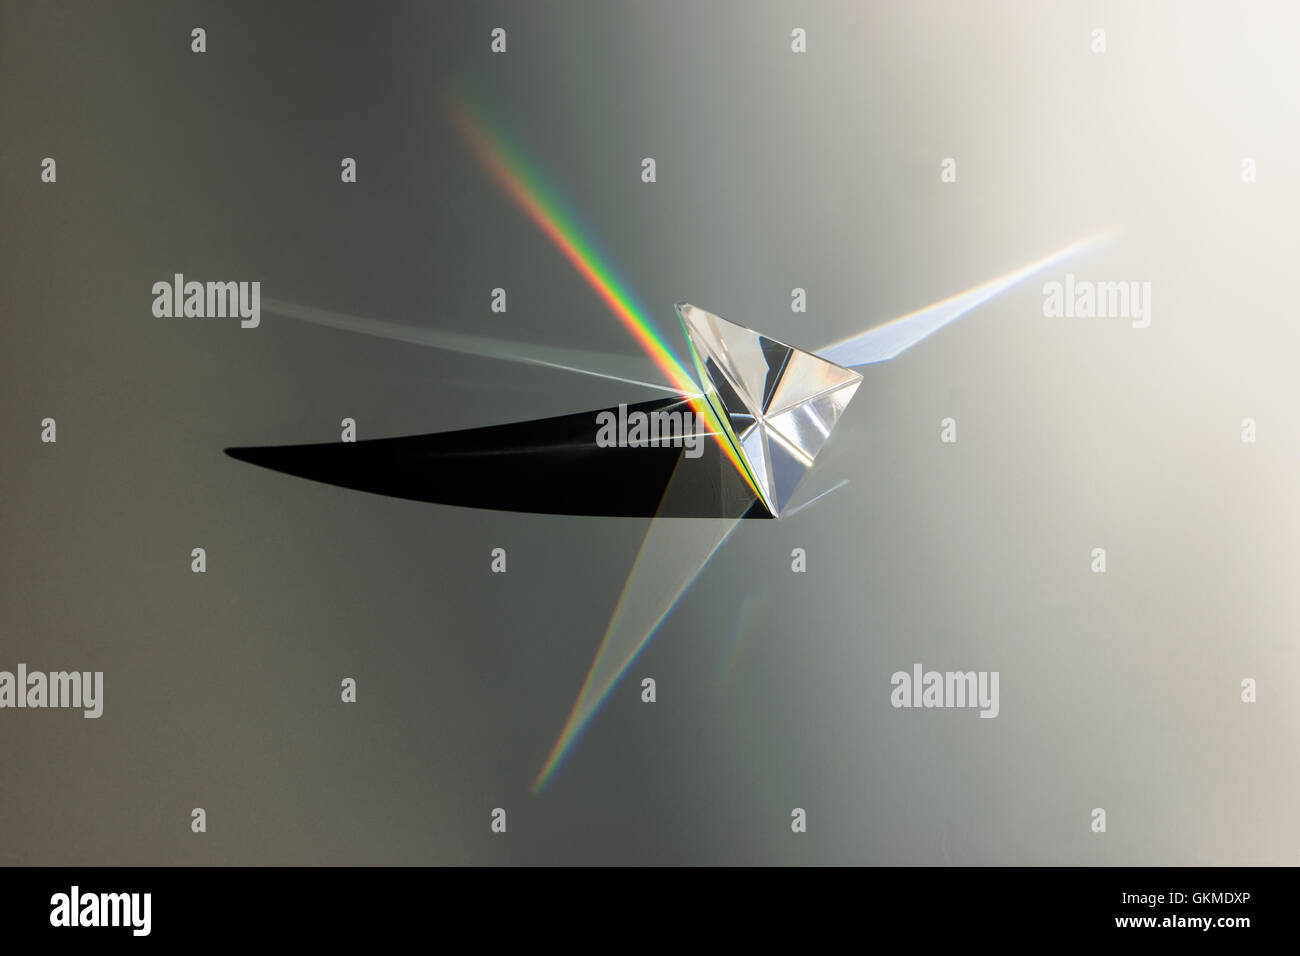 glass prism from above with rainbow beam and shadow Stock Photo